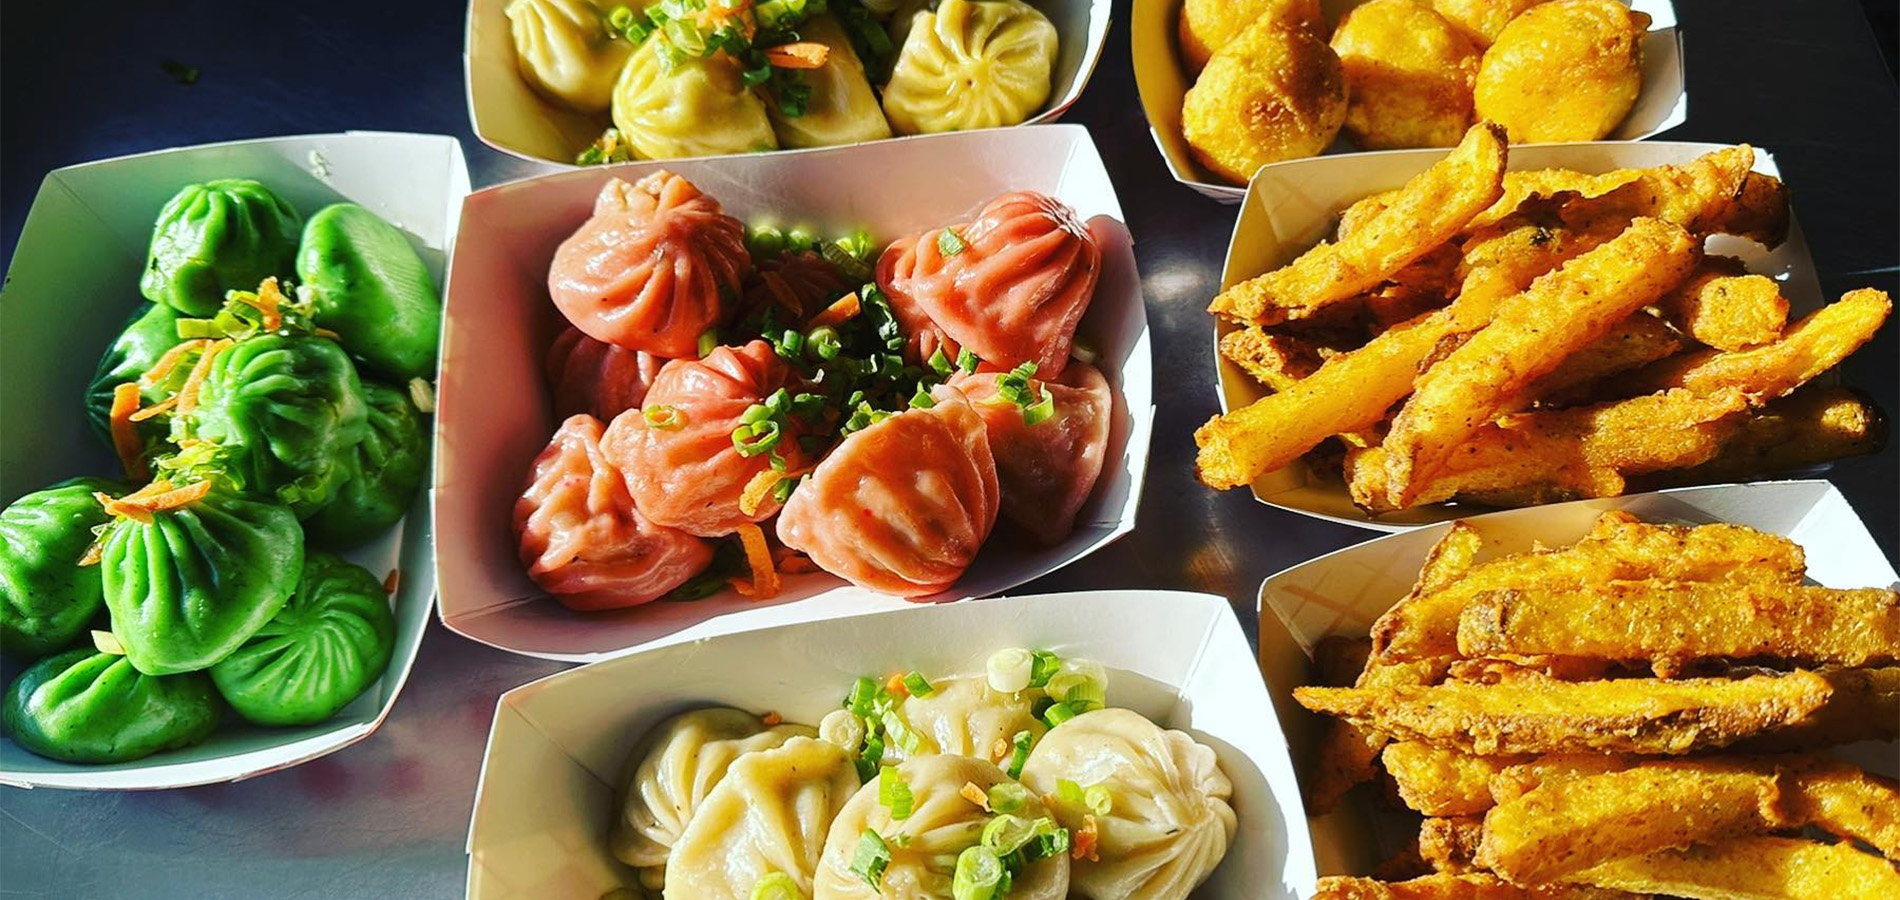 colorful dumplings and fried foods